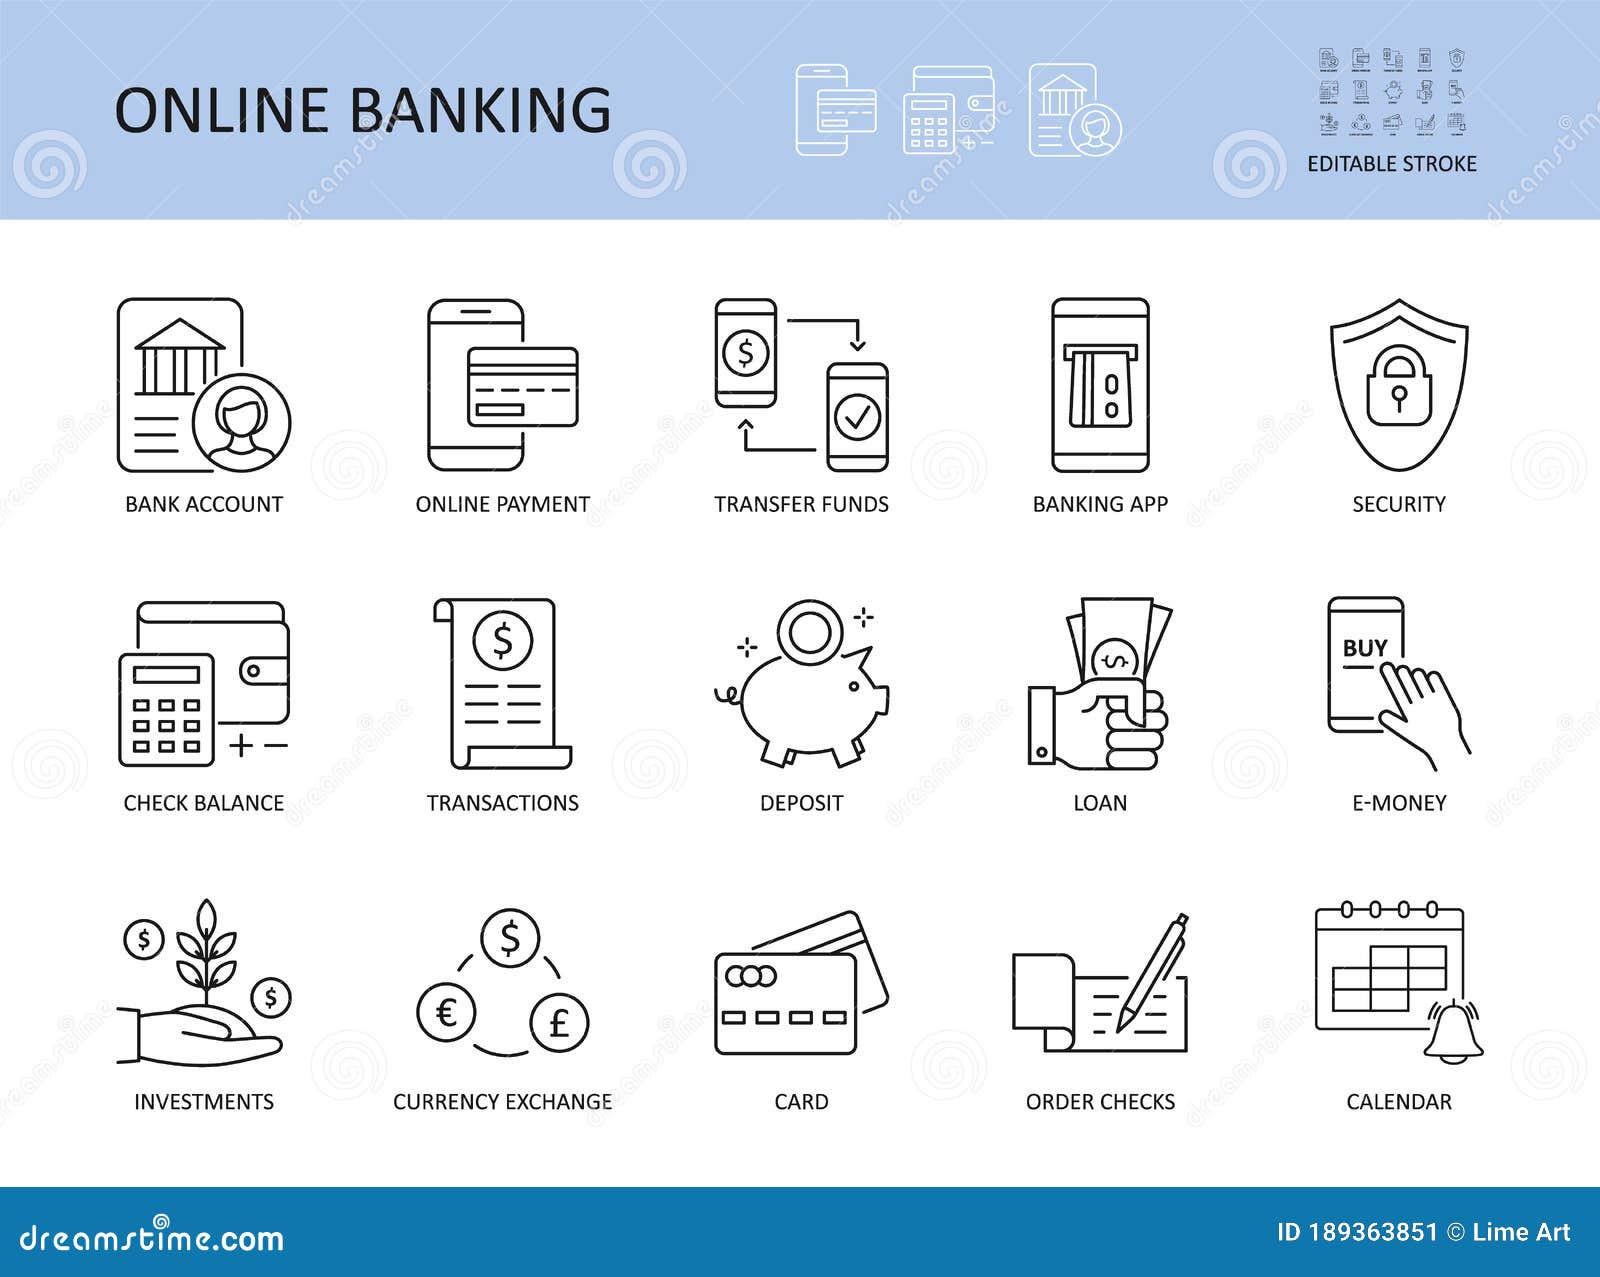 online banking. editable stroke  icons. bank account emoney transfer funds online payment. list of recent transaction